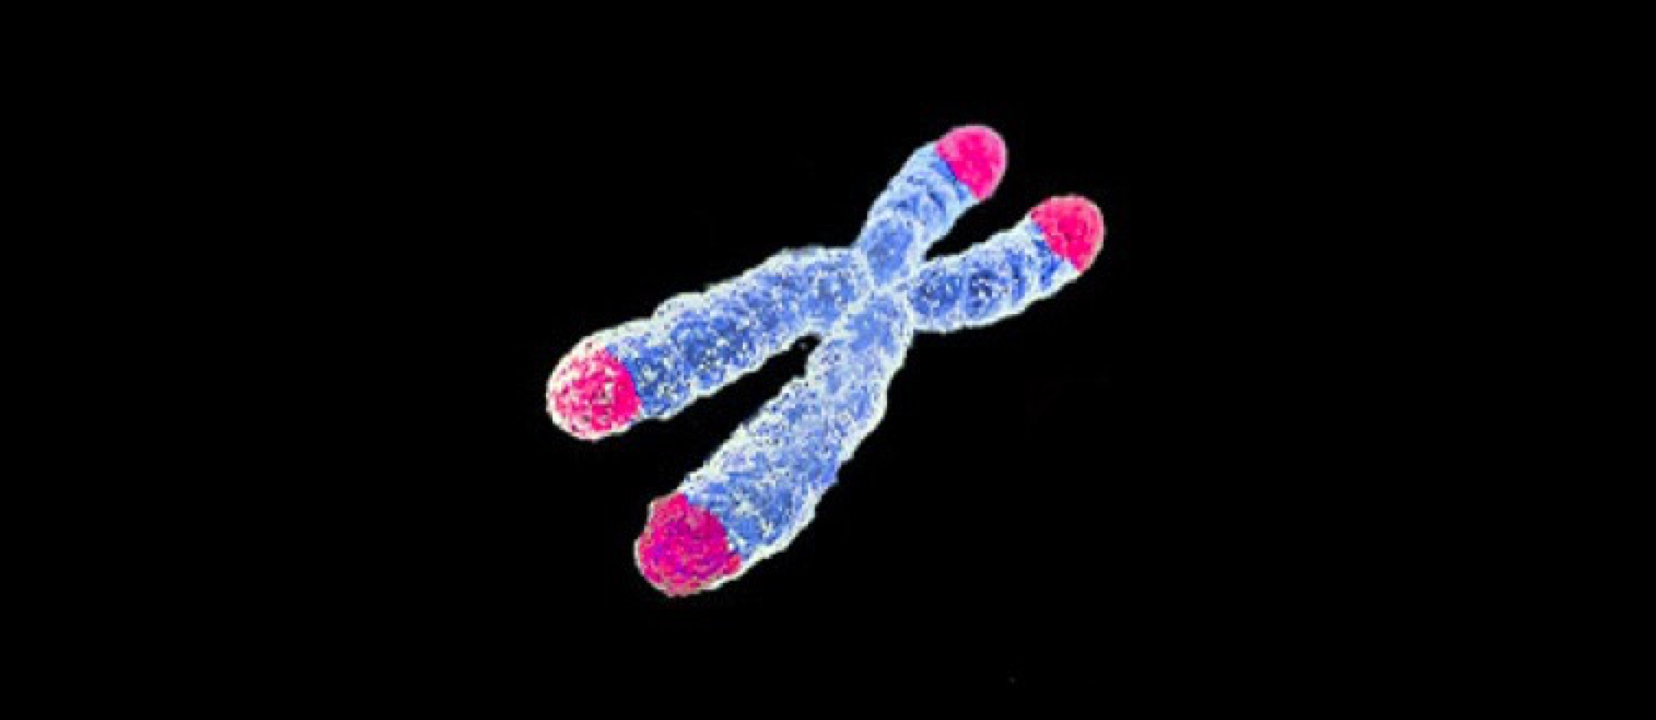 How to Protect Our Telomeres with Diet